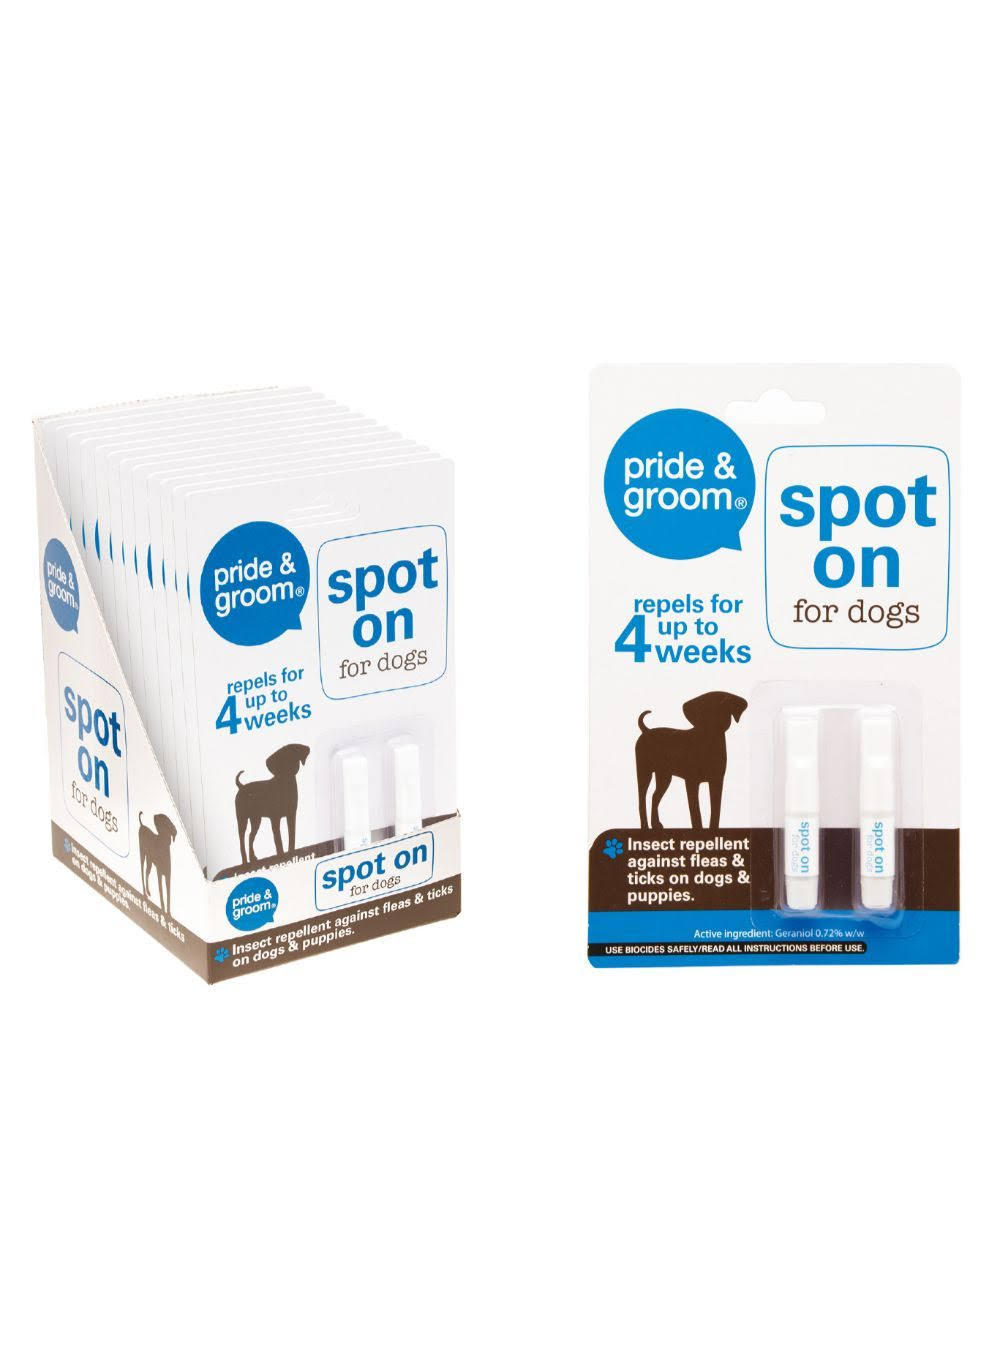 Pride & Groom Spot on for Dogs